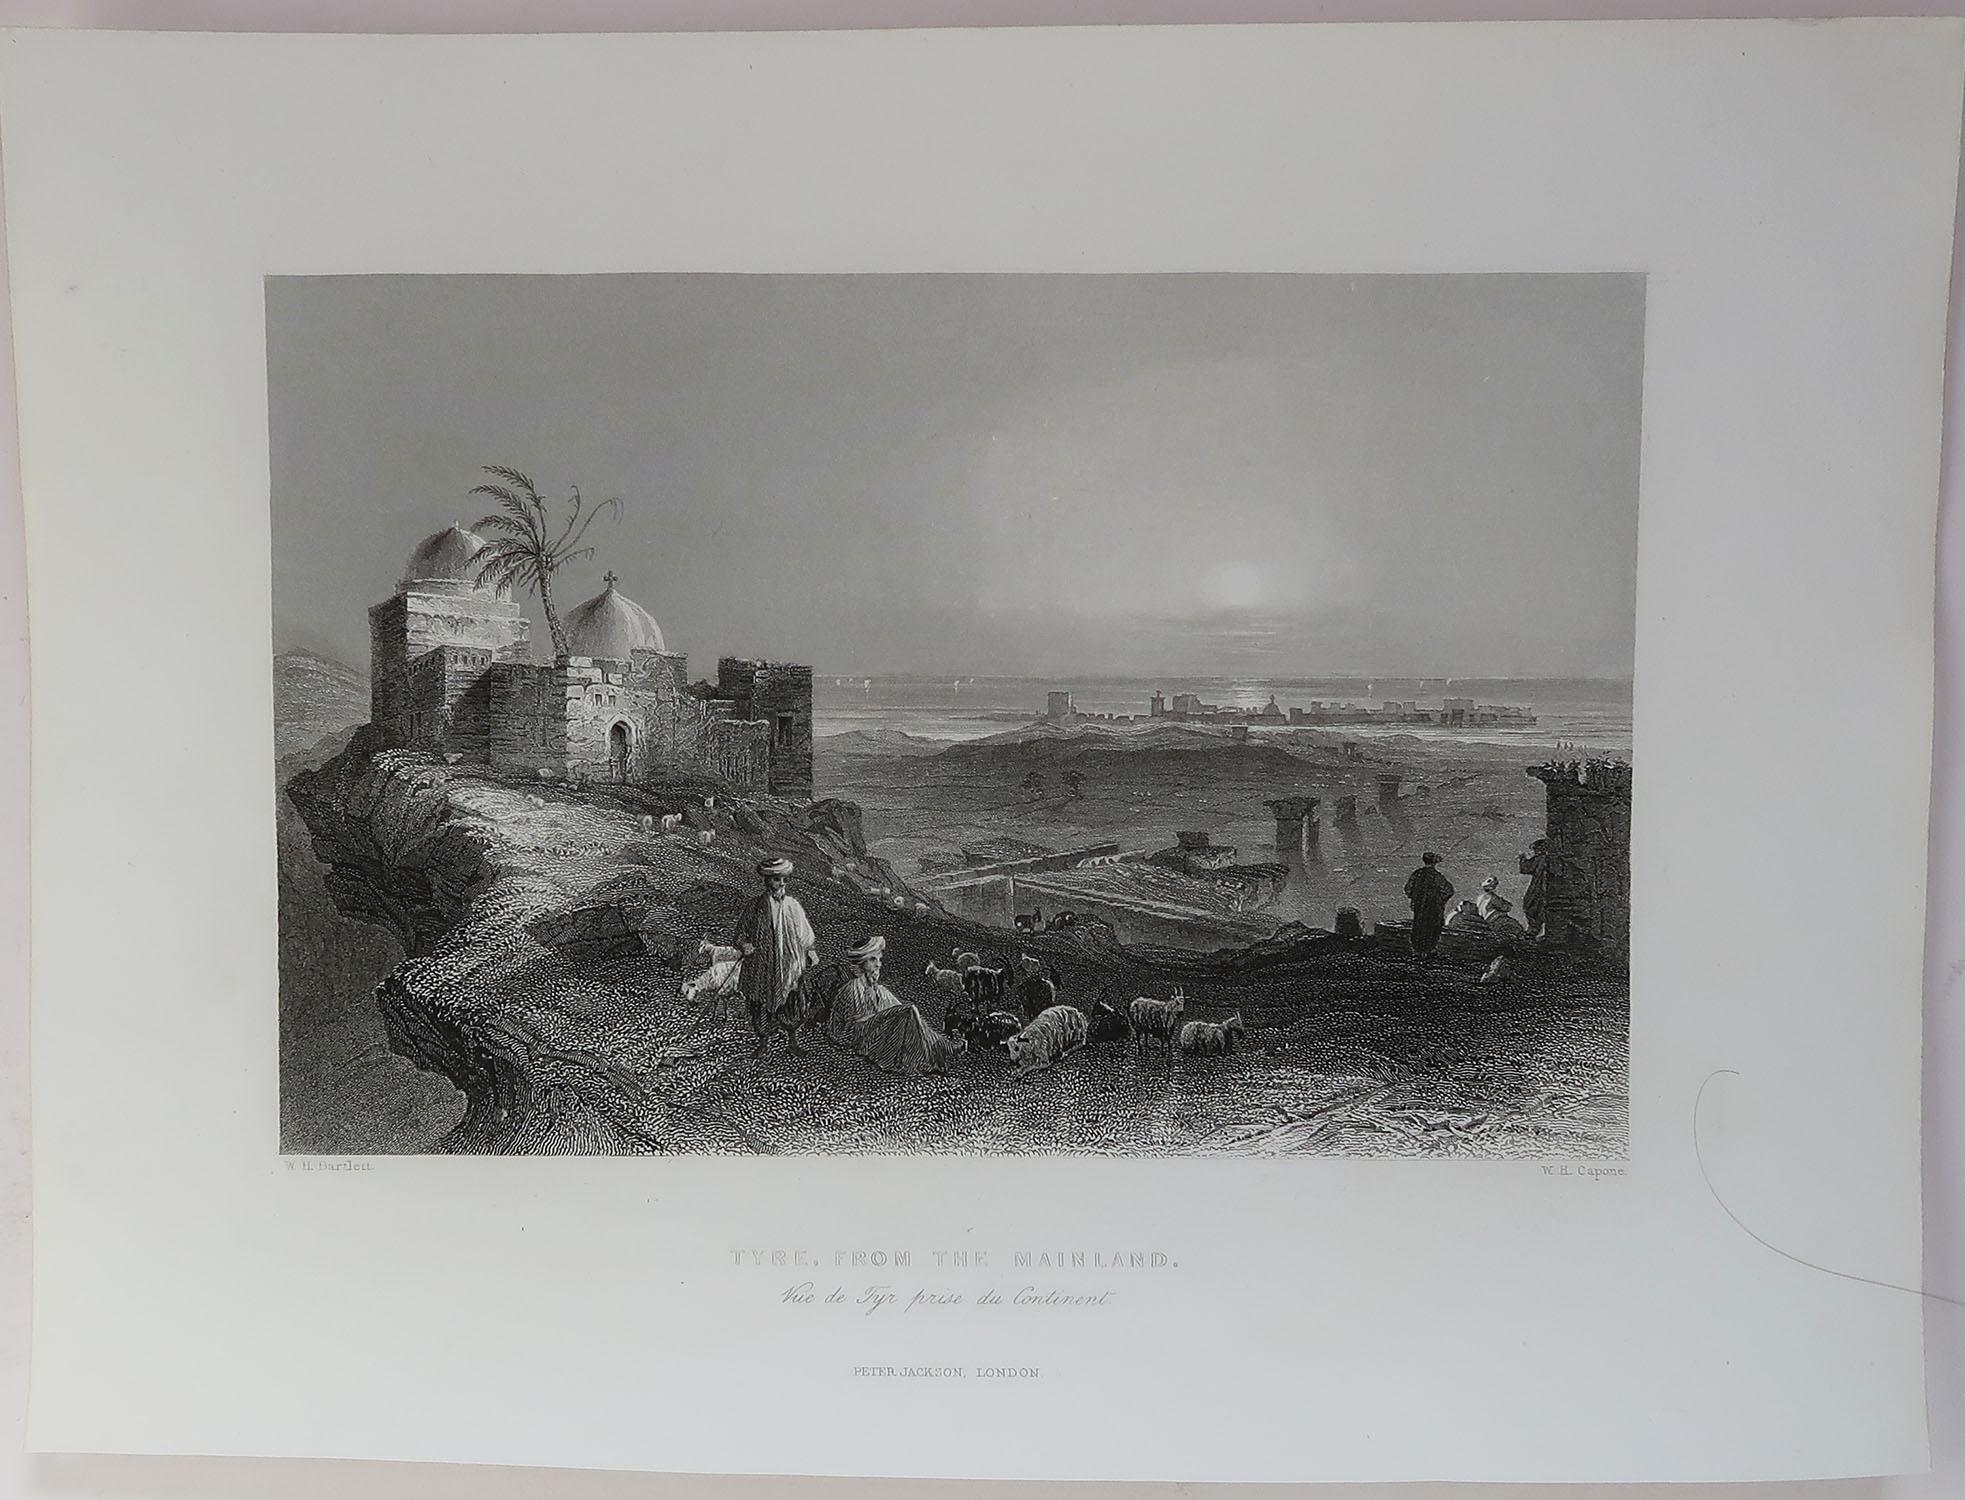 Islamic Set of 16 Original Antique Prints of The Levant / Holy Land /Middle East, C 1840